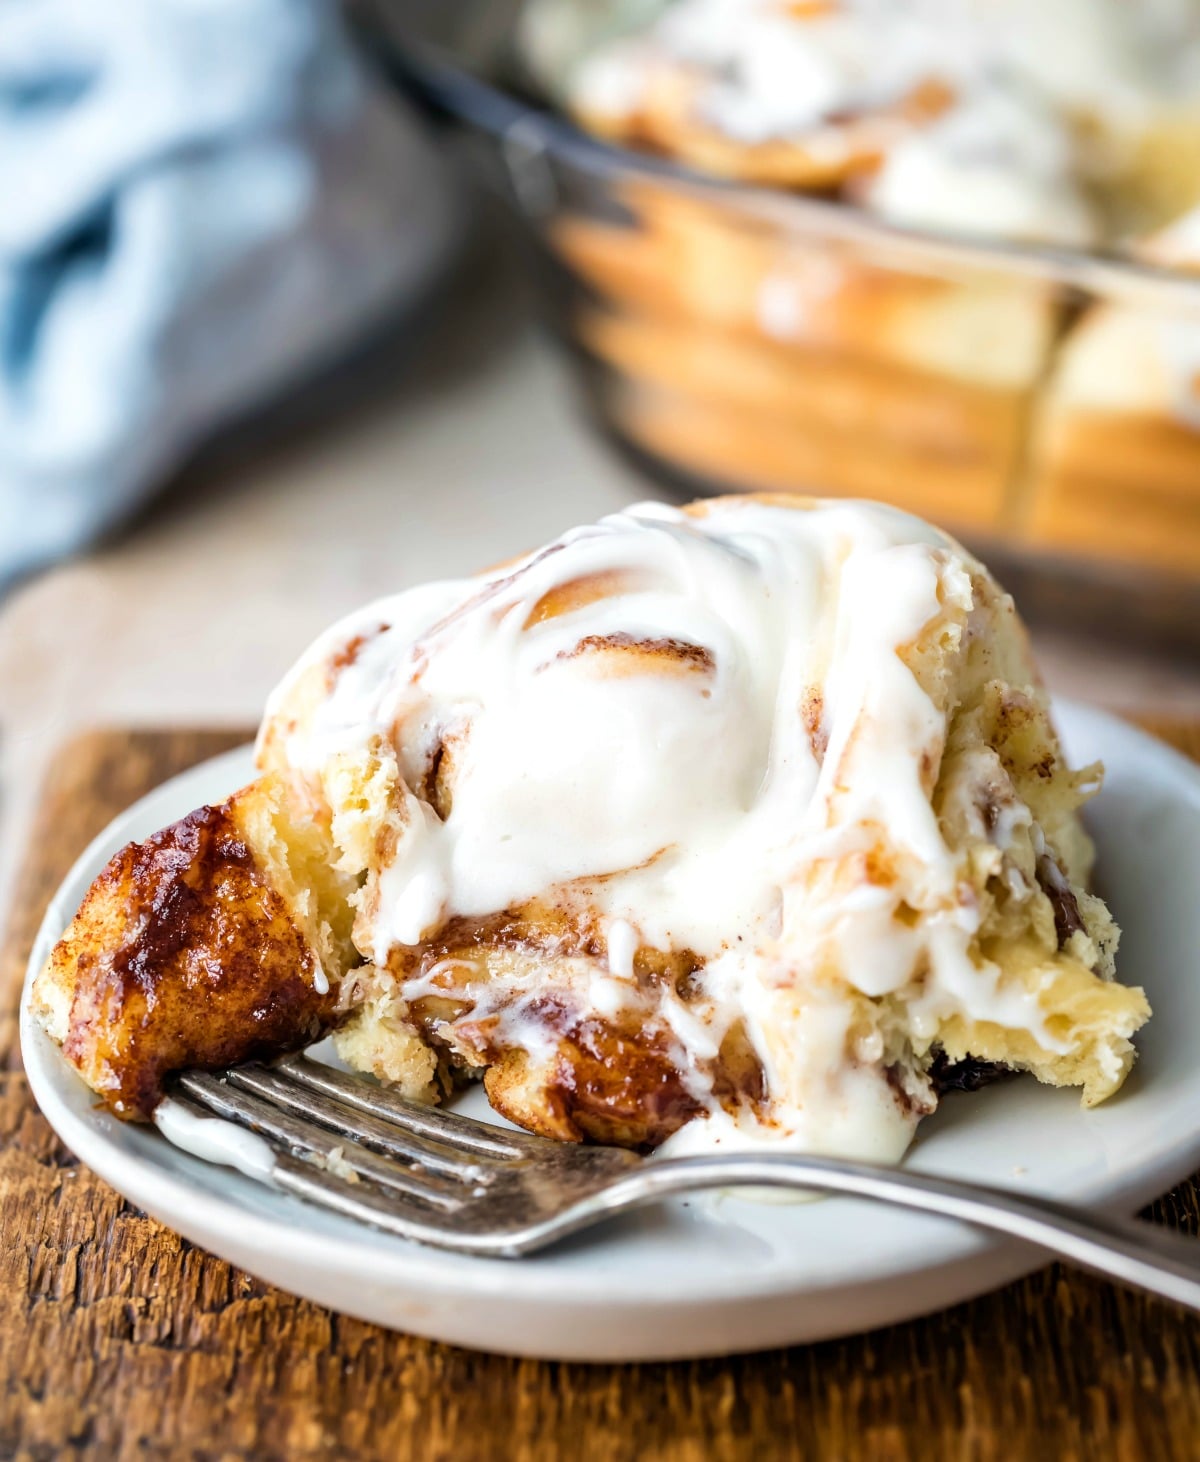 Homemade cinnamon roll with a bite on a fork